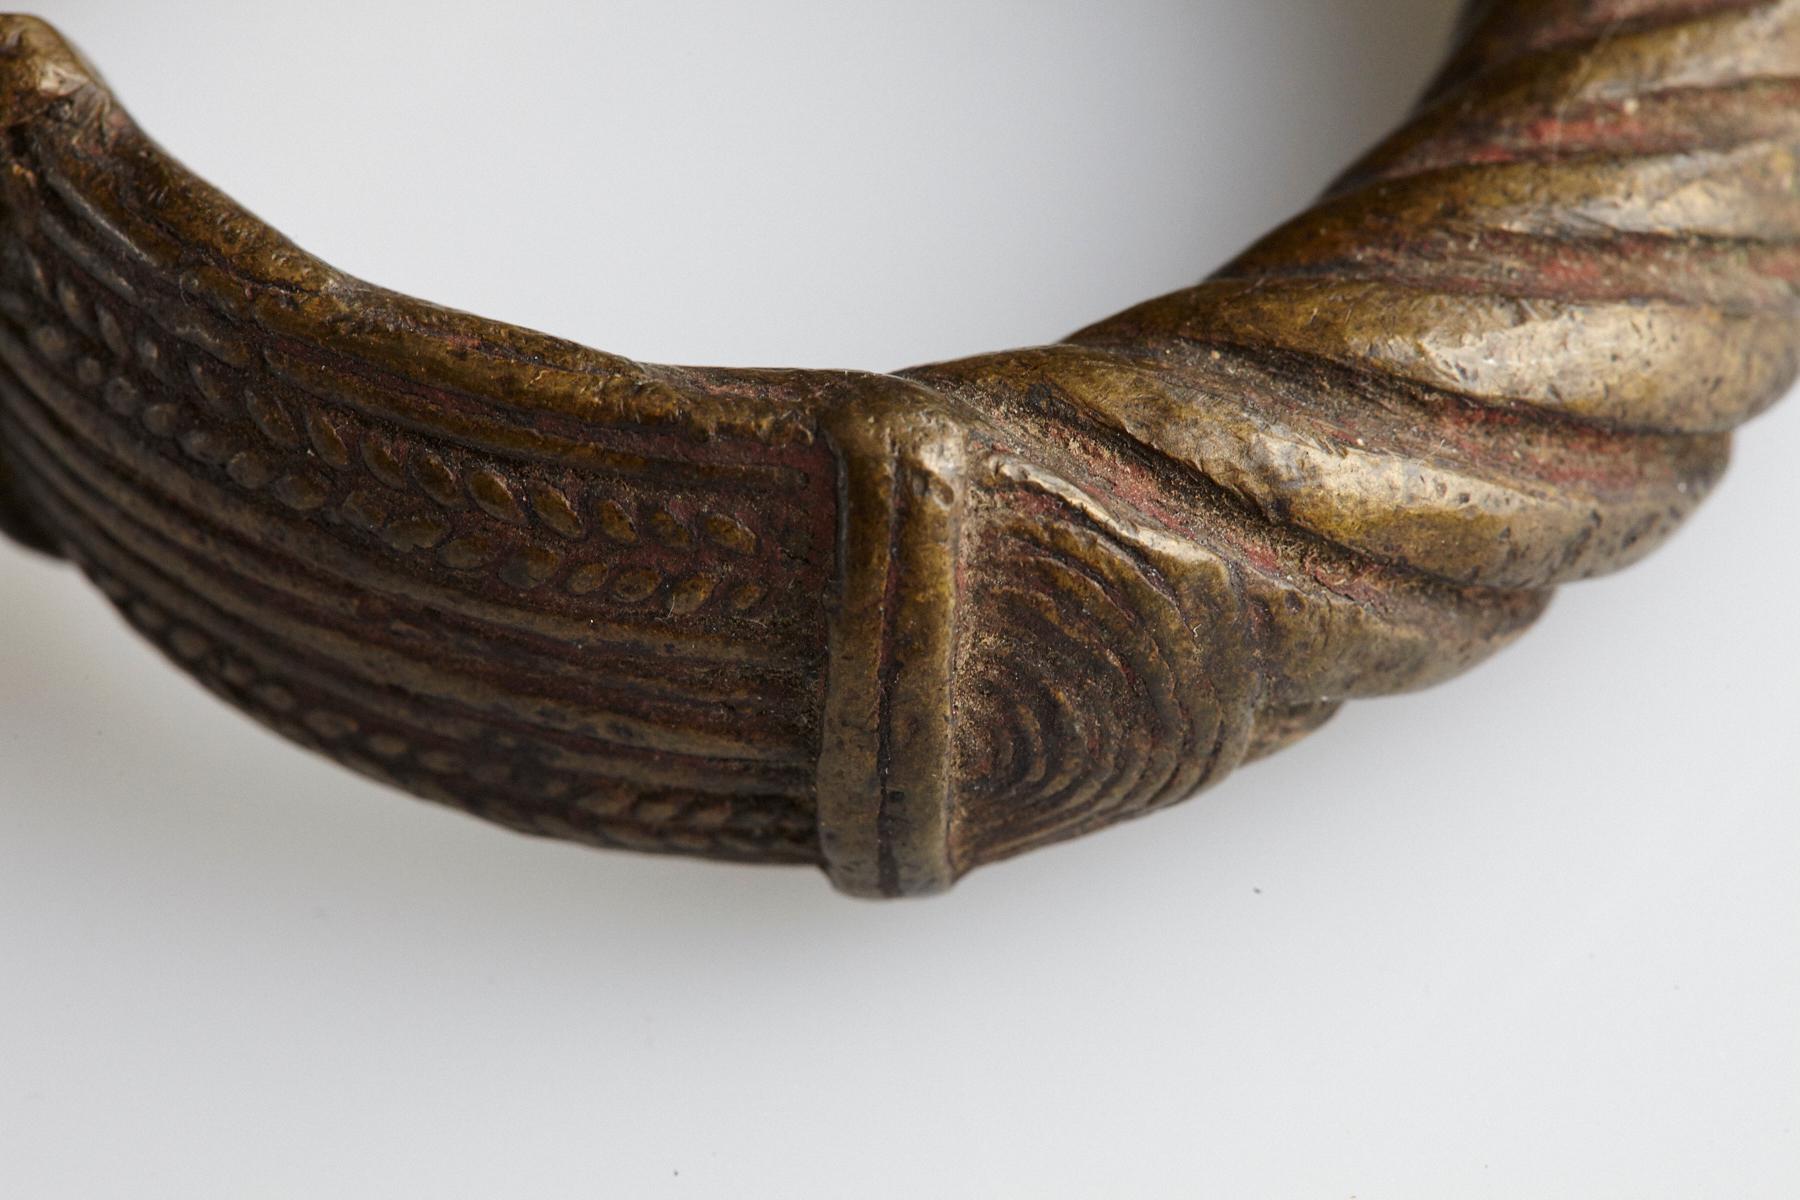 Bronze Currency Bracelet/Manilla, Dogon People, Burkina Faso, 19th c. - No 5 For Sale 2